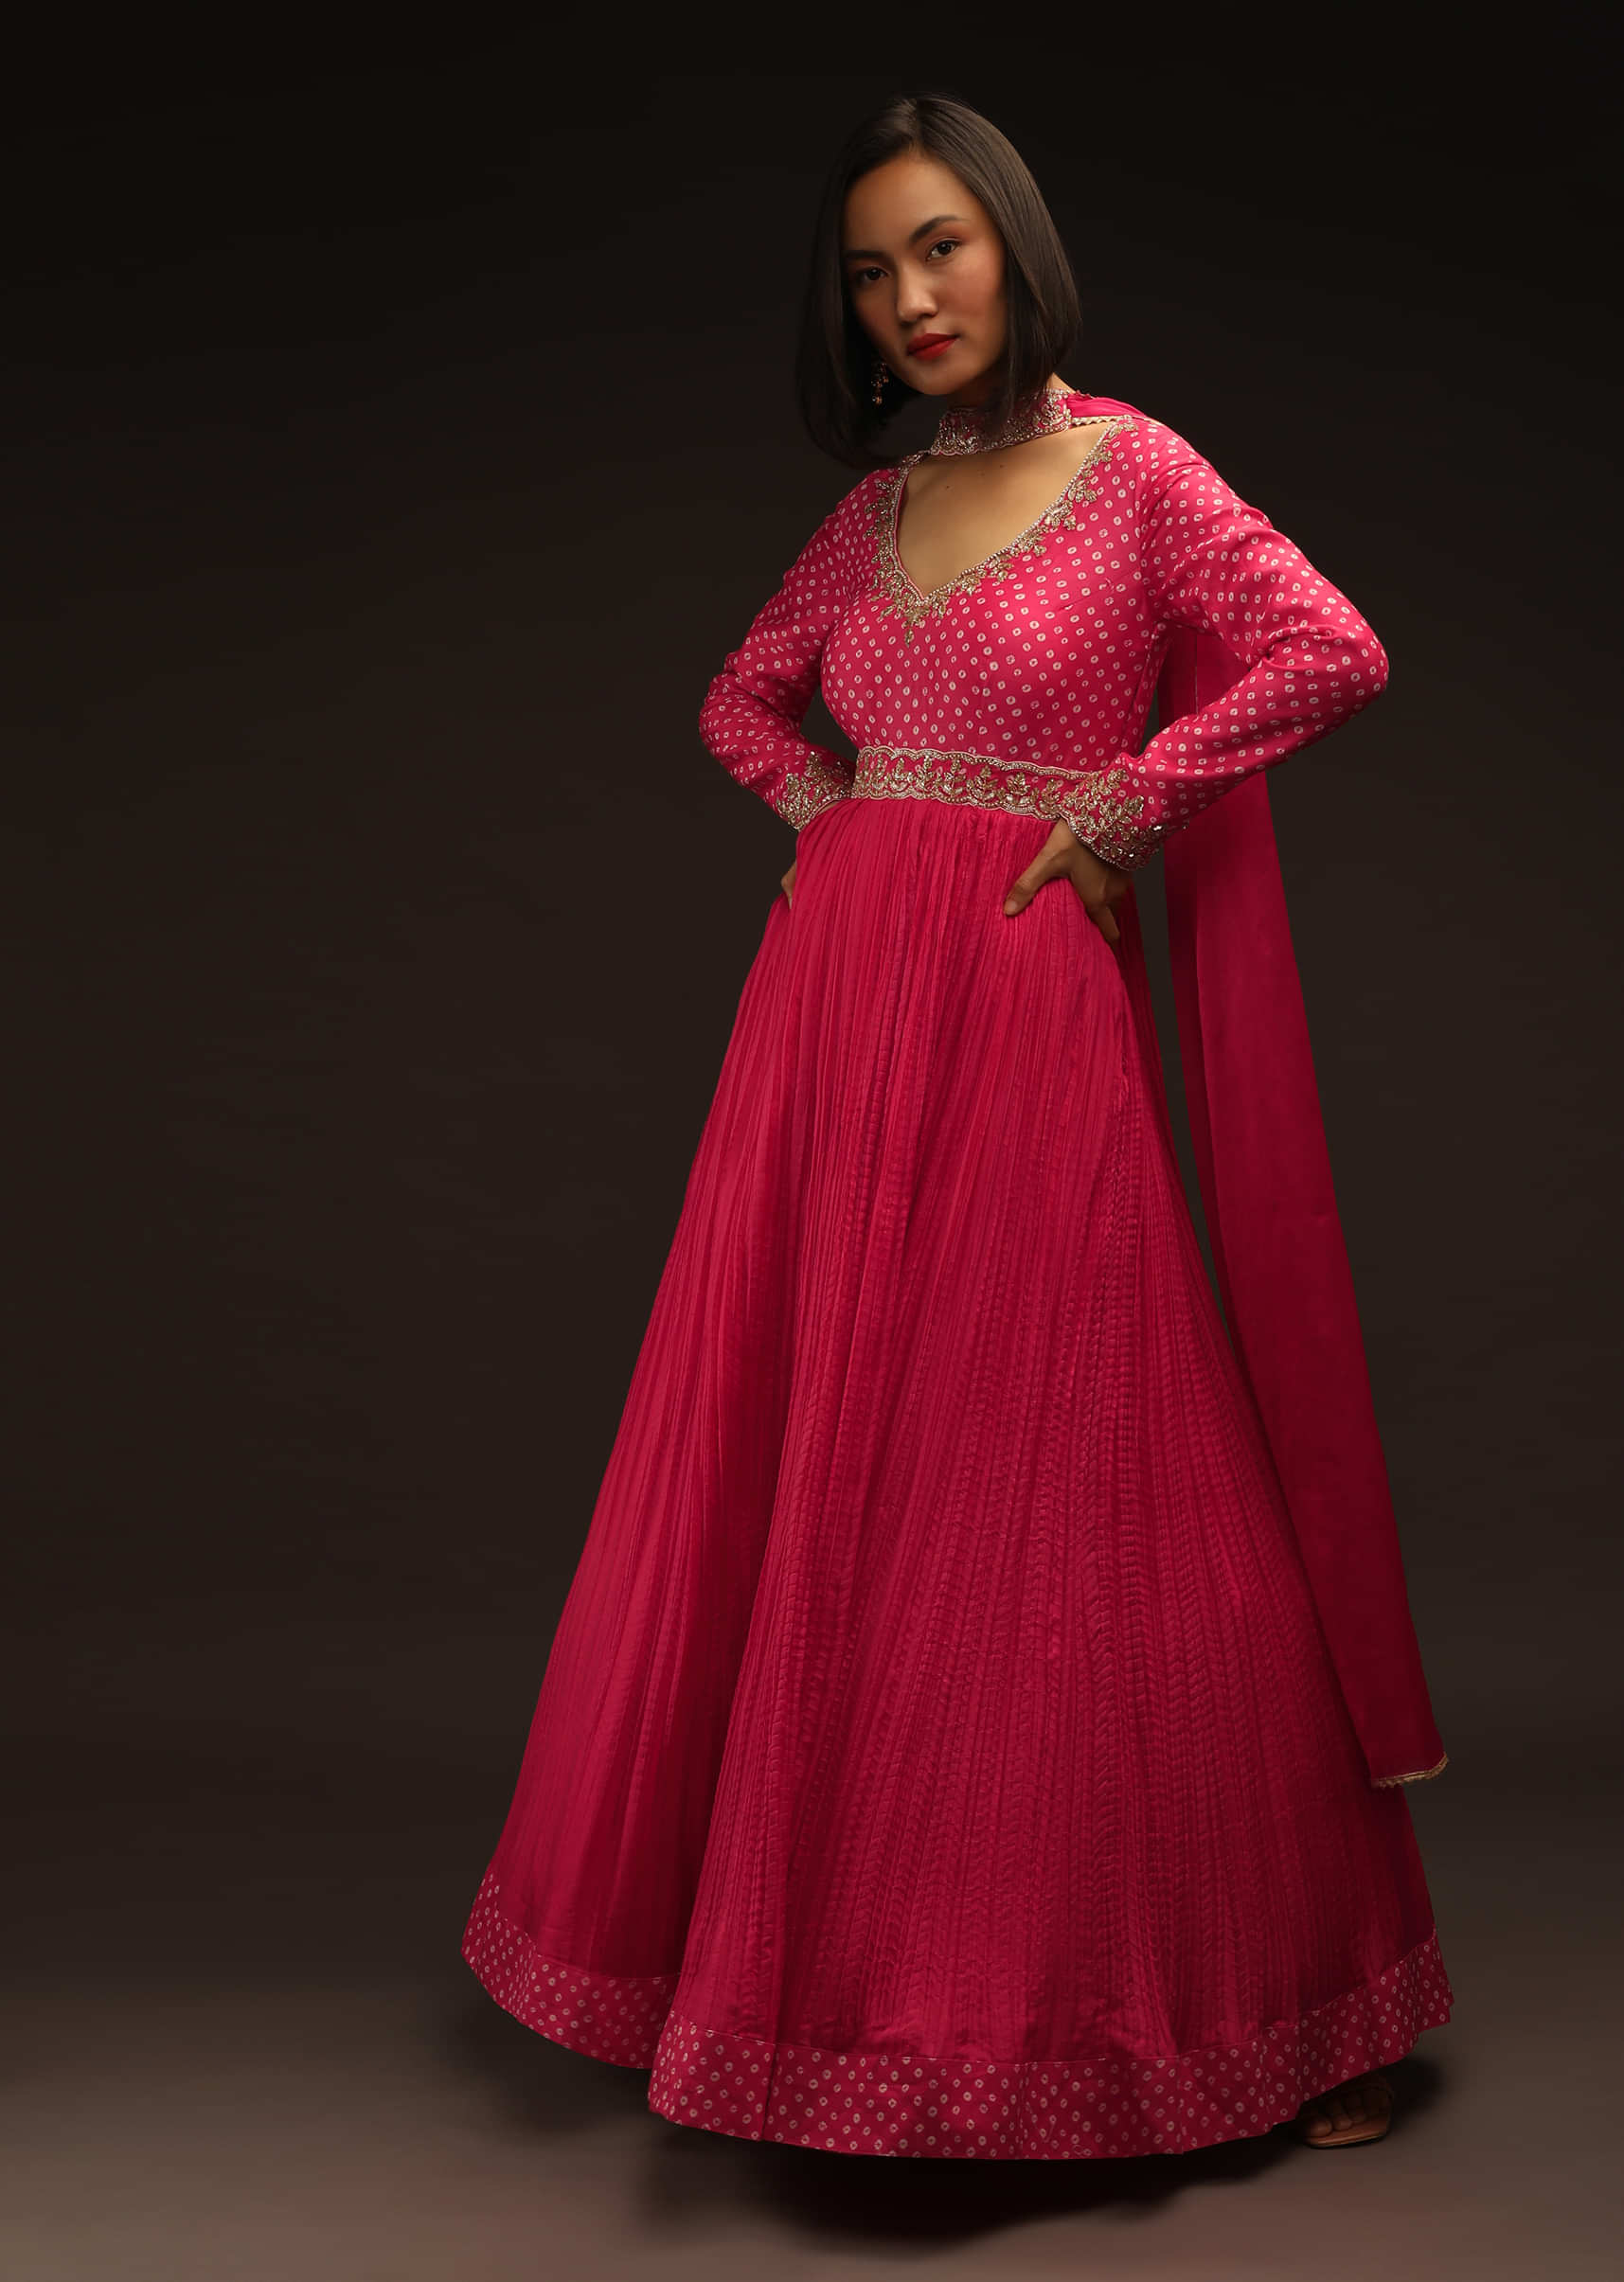 Hot Pink Anarkali Suit In Crushed Chiffon With Bandhani Print And Full Sleeves